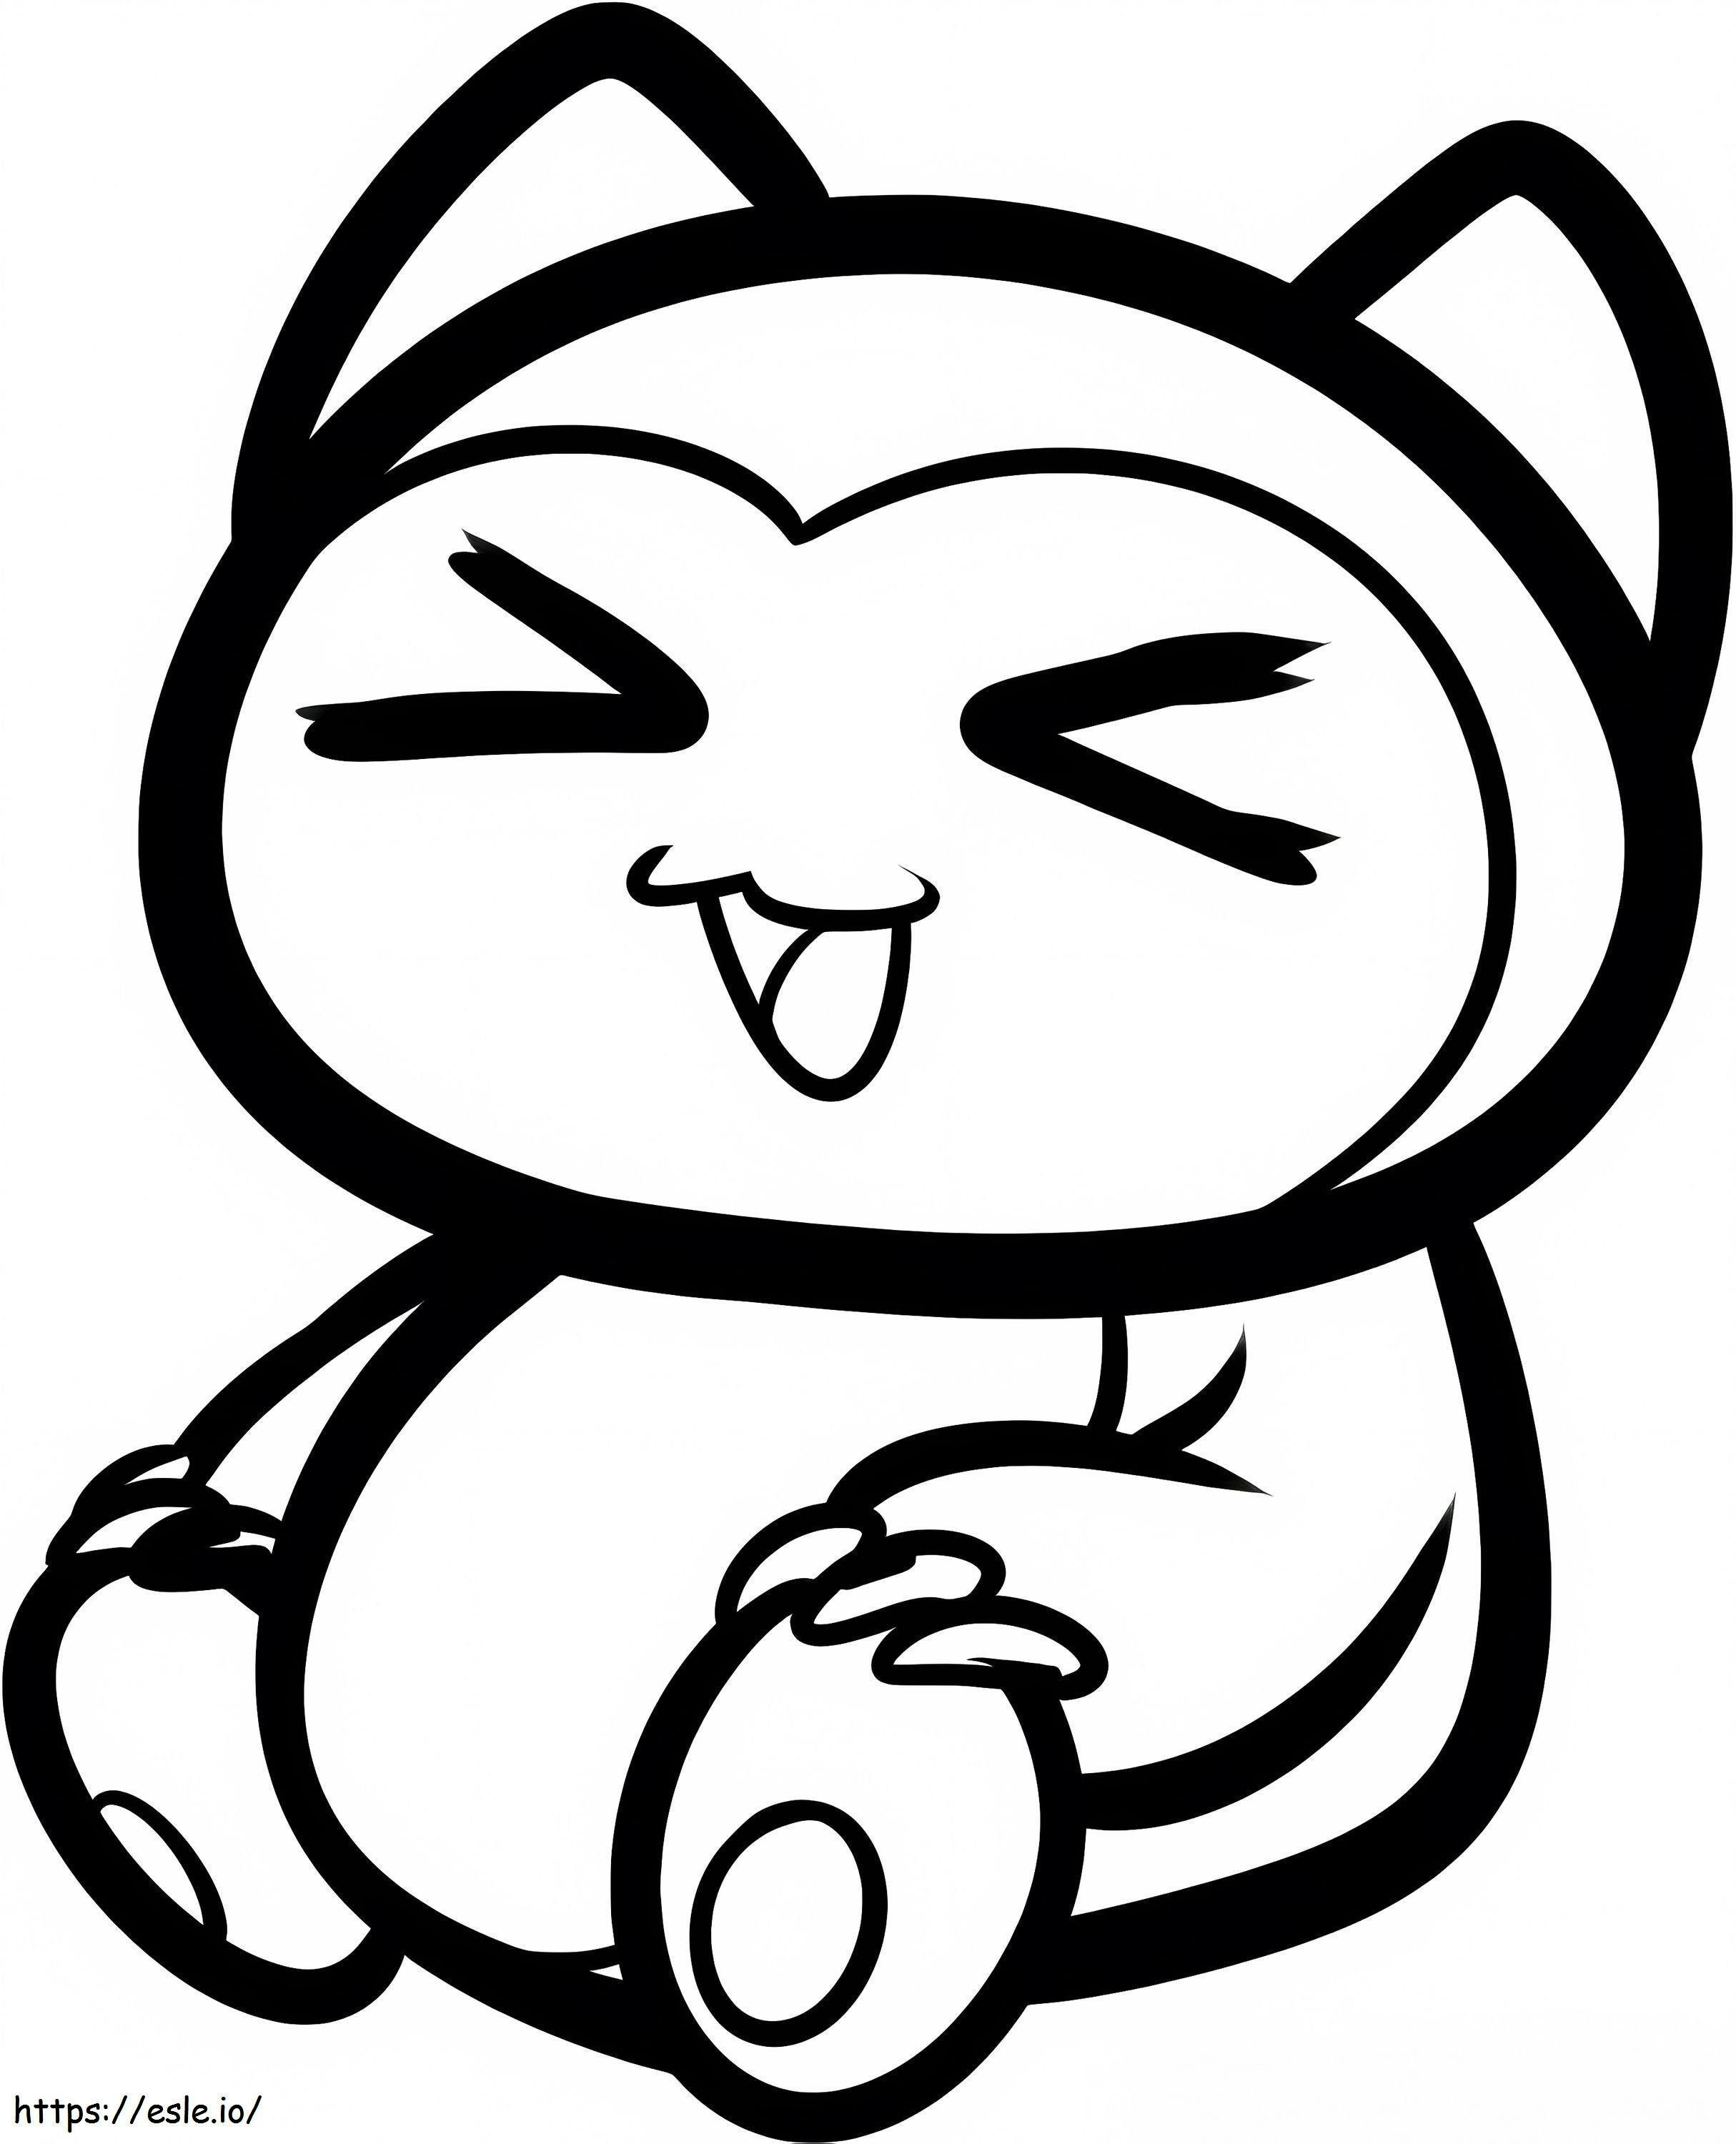 Chibi Snorlax coloring page